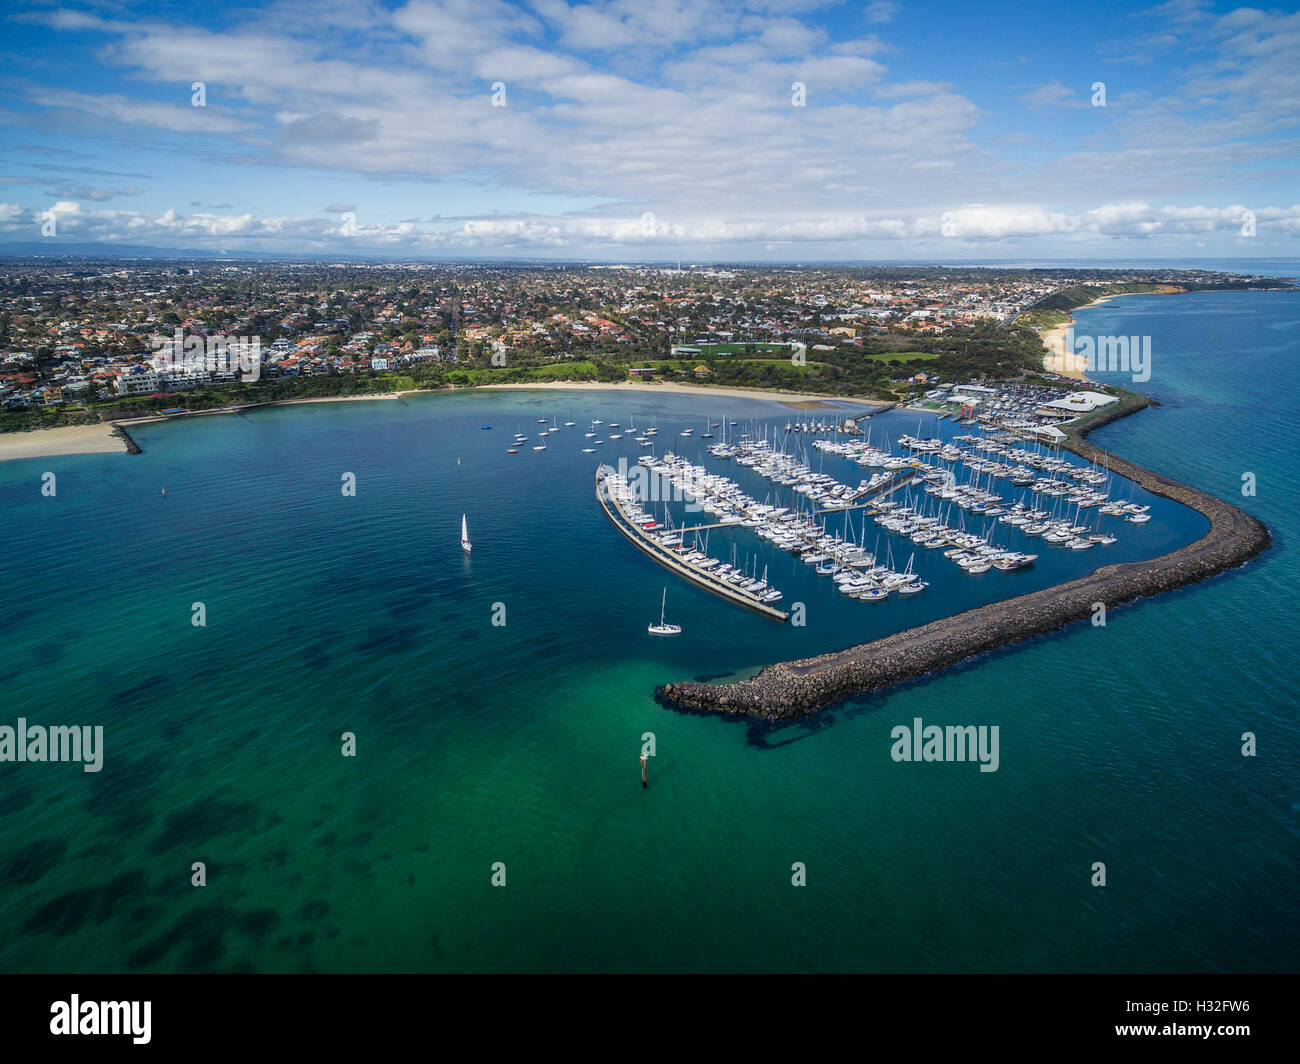 Aerial image of Sandringham Marina and Yacht Club with suburban landscape in the background. Melbourne, Victoria, Australia Stock Photo